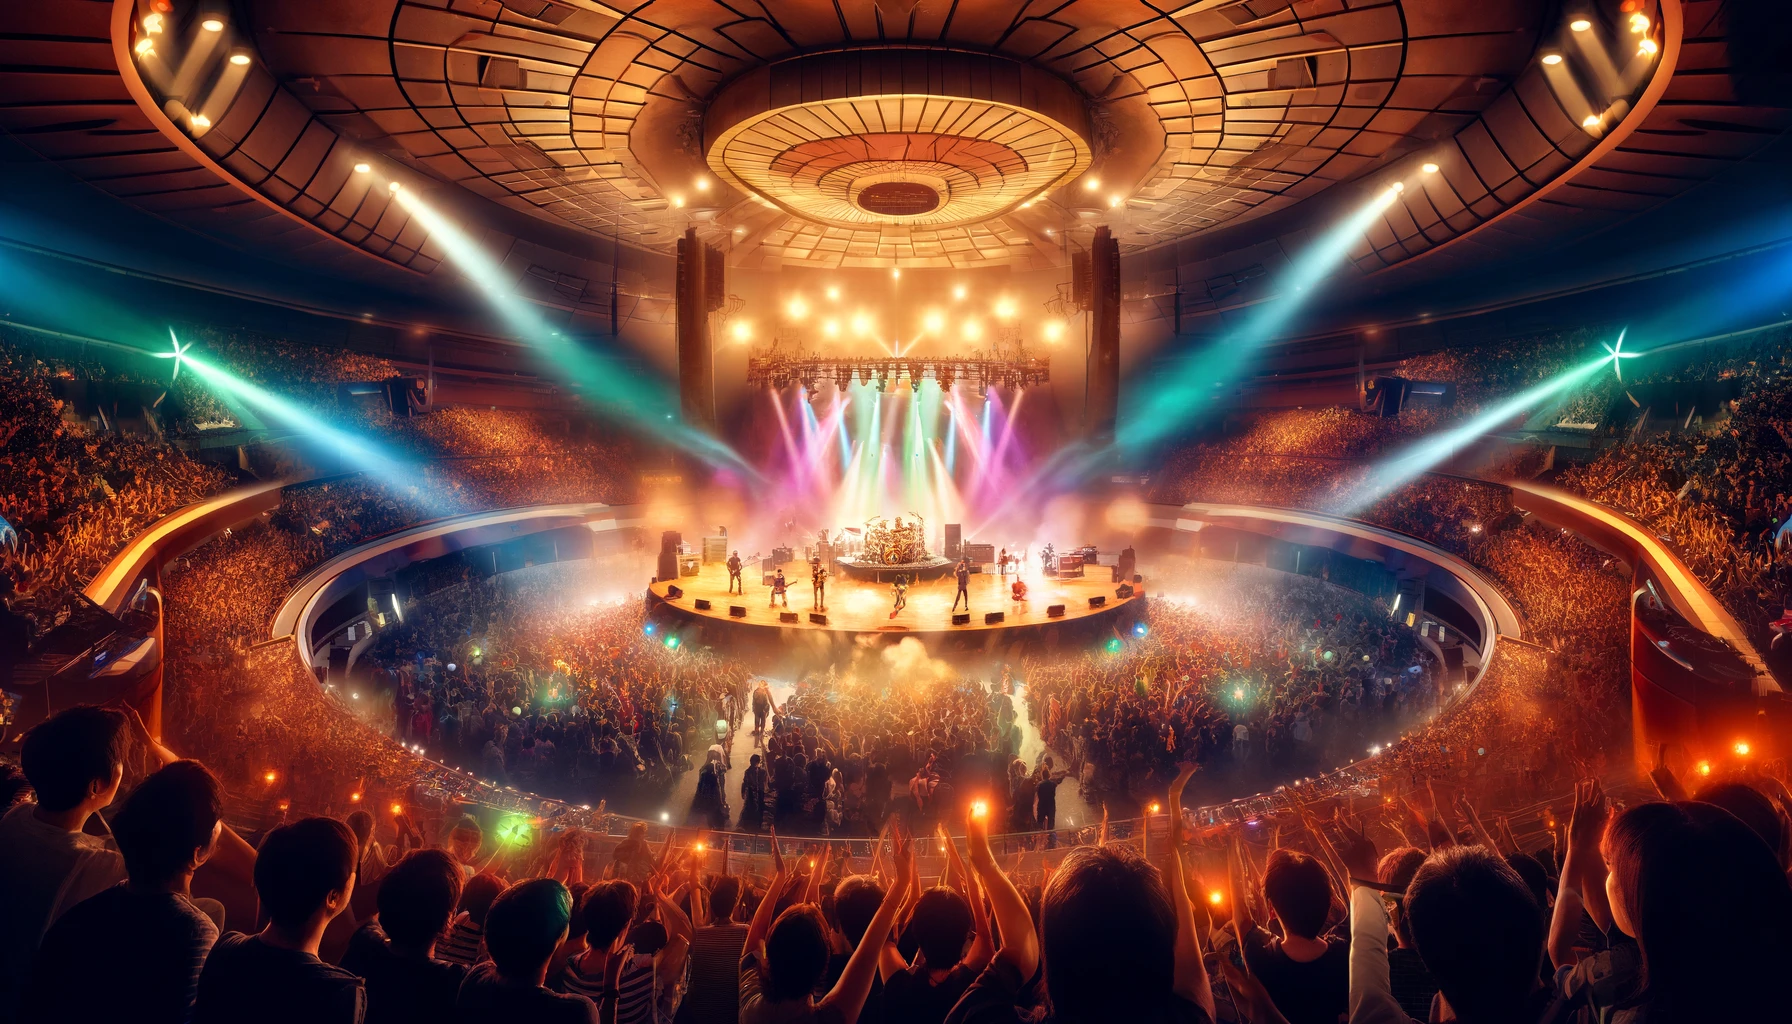 A vibrant live concert scene inside the famous Budokan arena in Tokyo, Japan, depicting a large enthusiastic crowd and a band performing on stage. The stage is illuminated with bright lights, colorful lasers, and smoke effects. The audience is diverse, with people of different ages and backgrounds, waving light sticks and cheering. The setting shows the iconic circular interior of the Budokan, filled with energy and excitement. The image is in a wide 16:9 format.